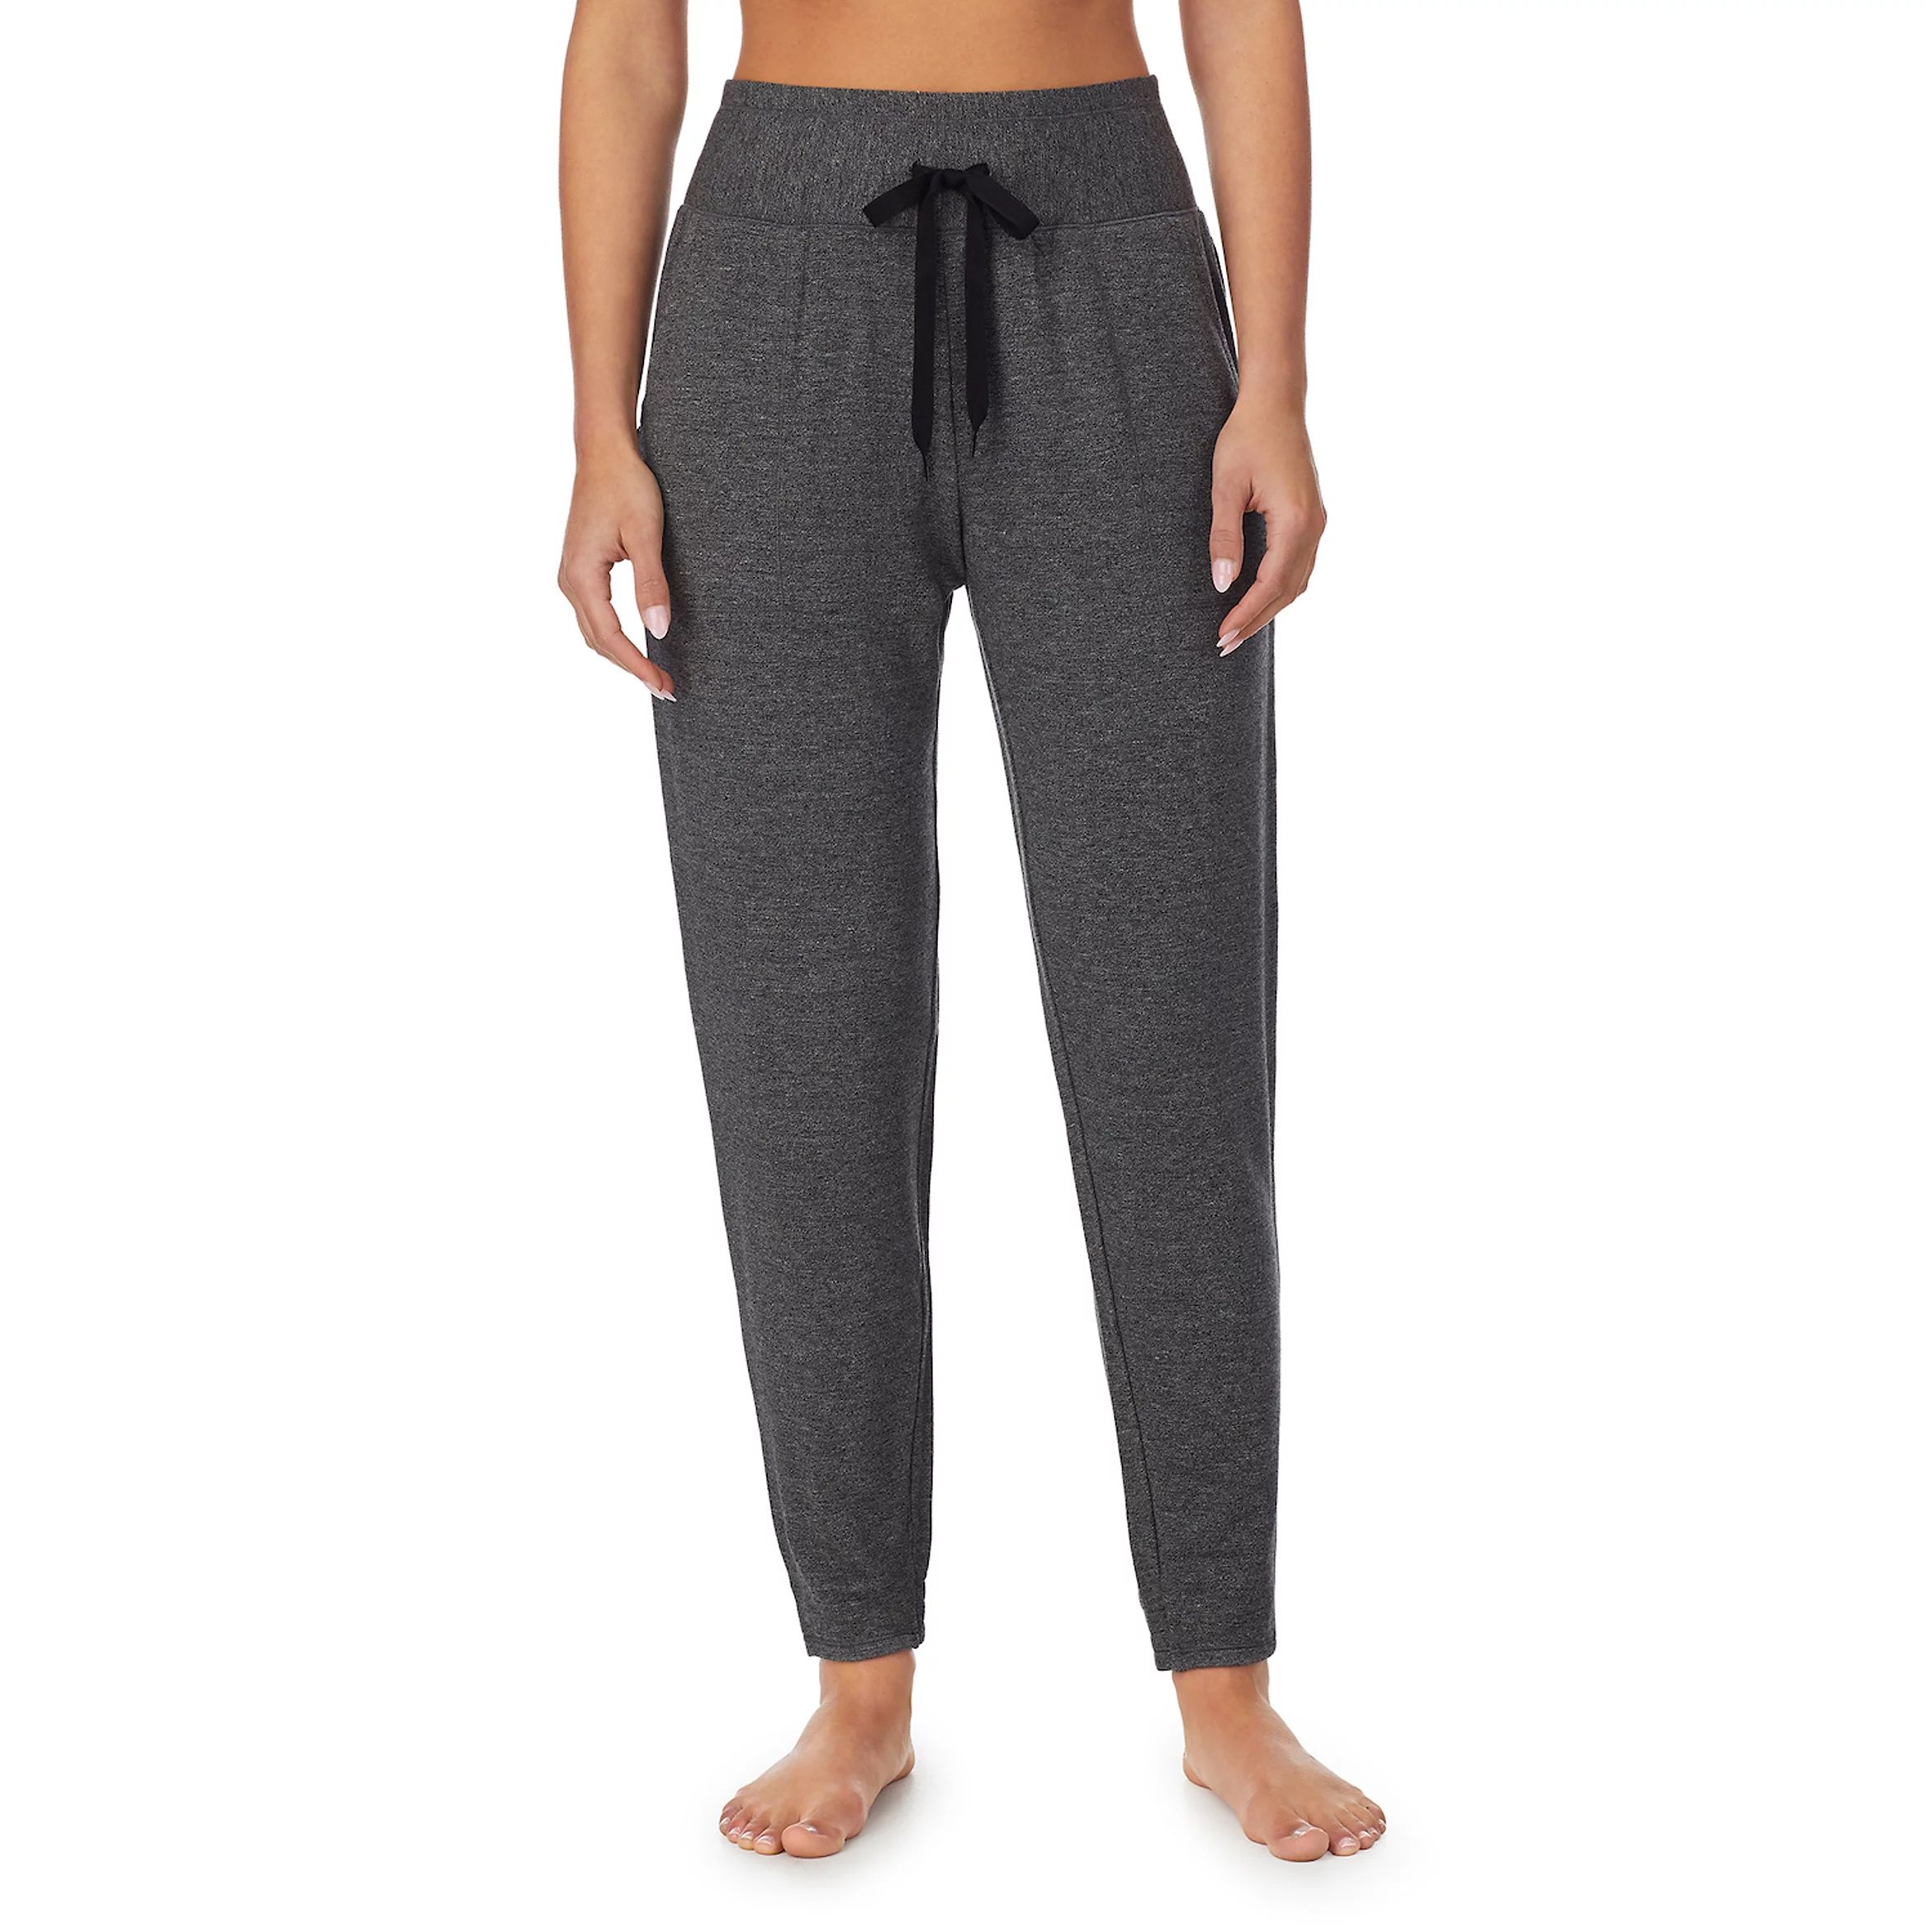 ColorColor Charcoal Heather ,double tap to change colorCharcoal Heather3 colors available | Kohl's